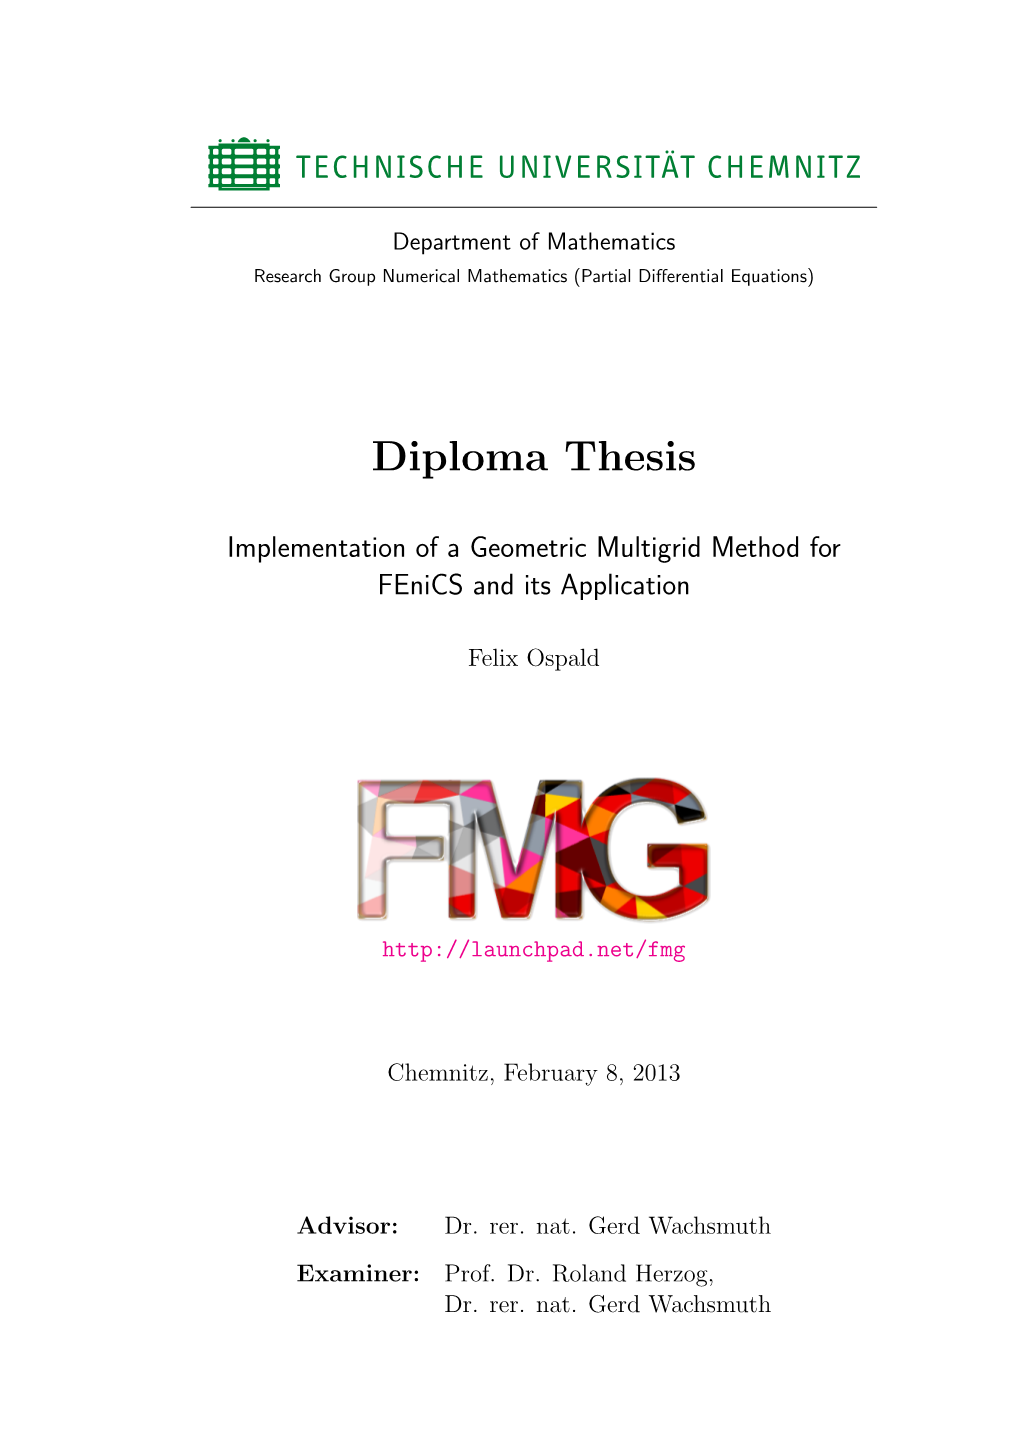 Implementation of a Geometric Multigrid Method for Fenics and Its Application